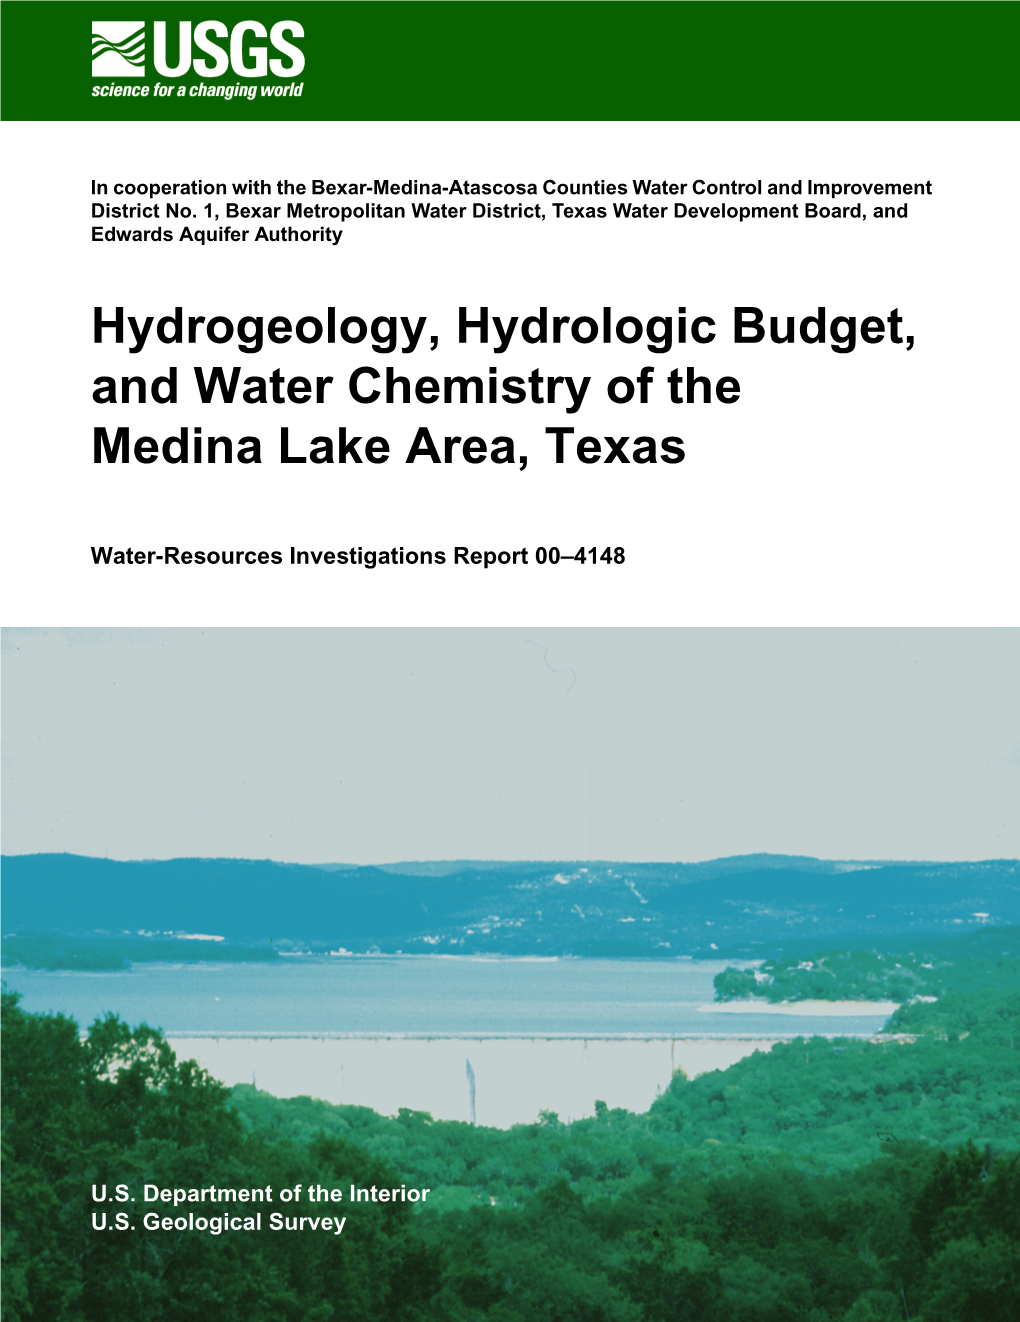 Hydrogeology, Hydrologic Budget, and Water Chemistry of the Medina Lake Area, Texas